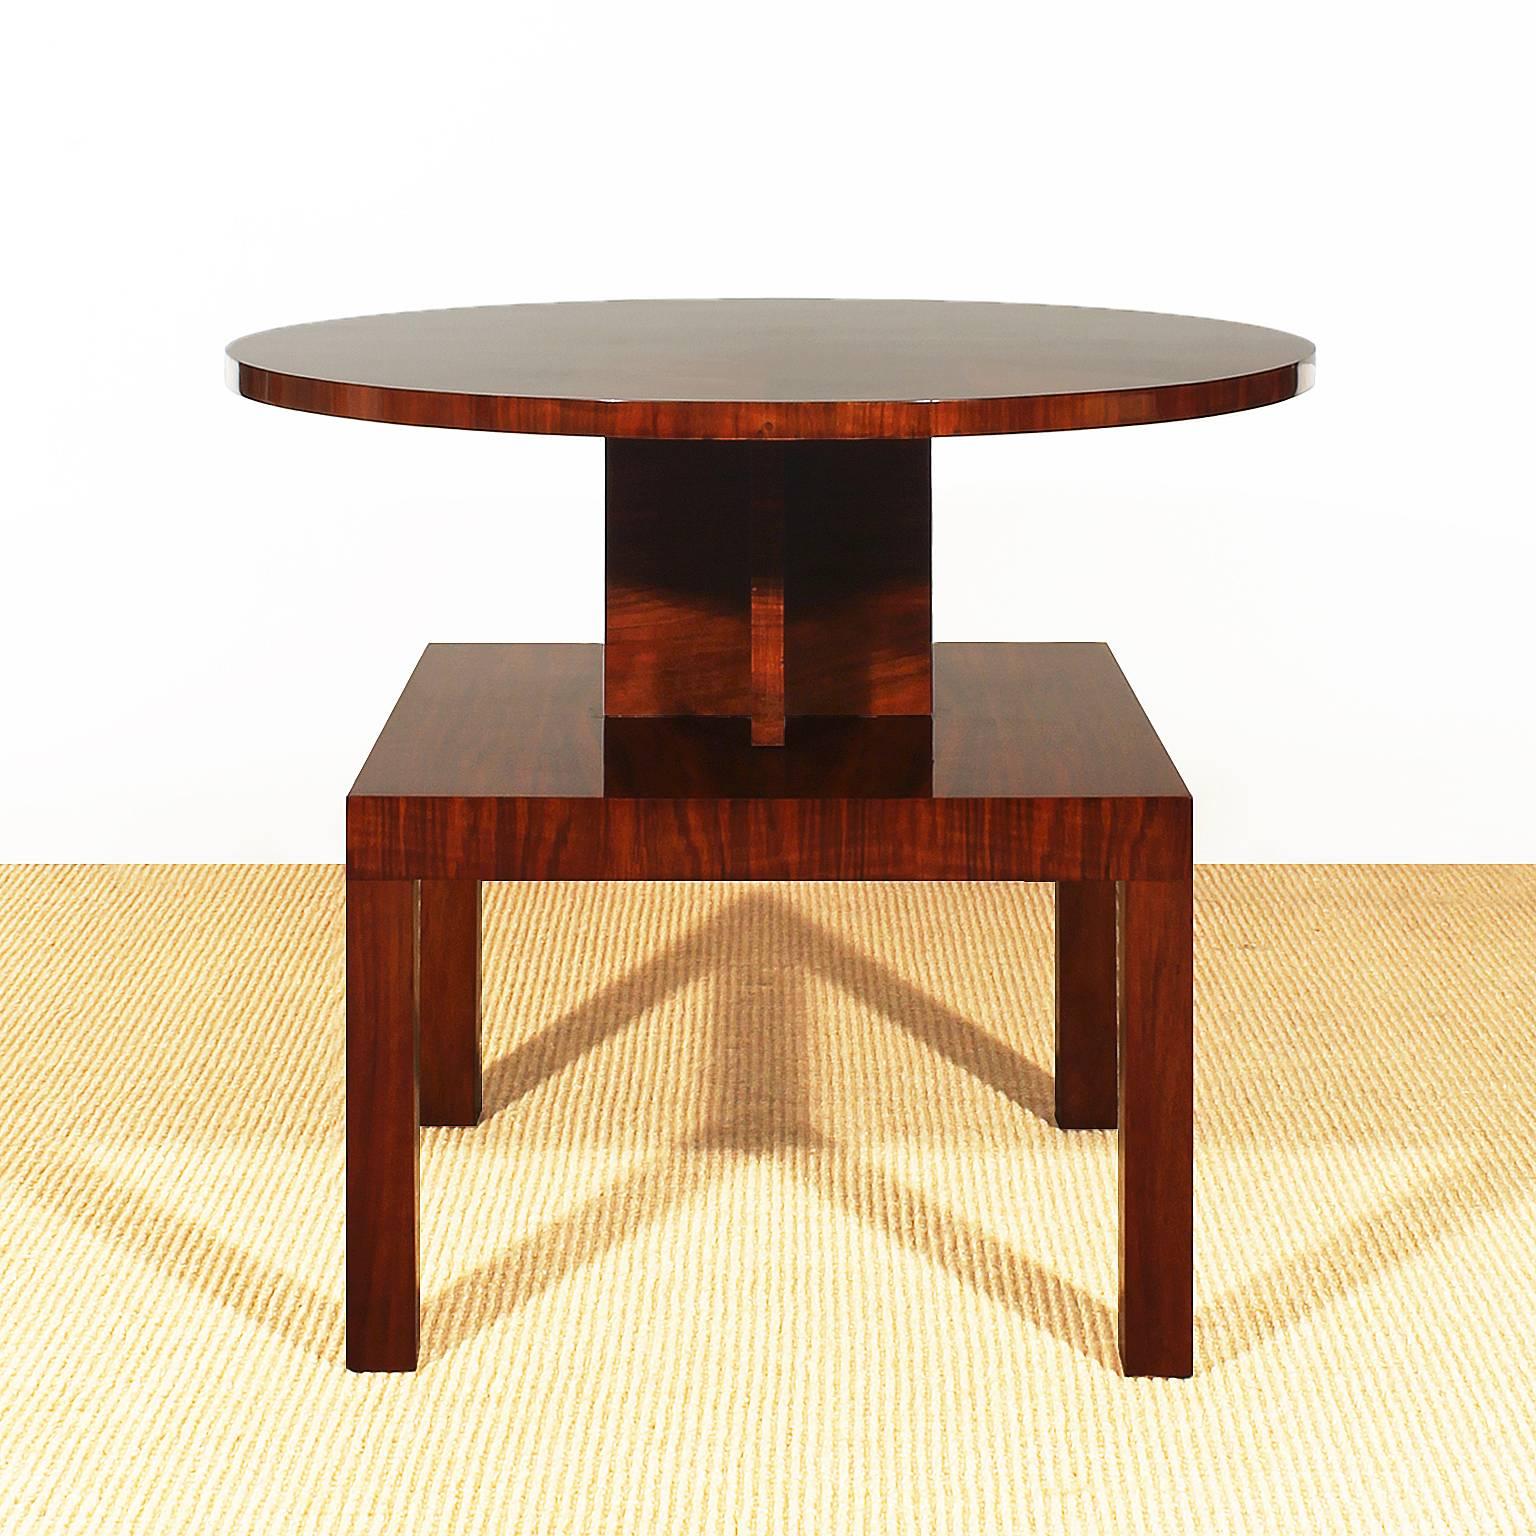 Art Deco cubist side table, walnut veneer with marquetry, French polish,
France, circa 1930.